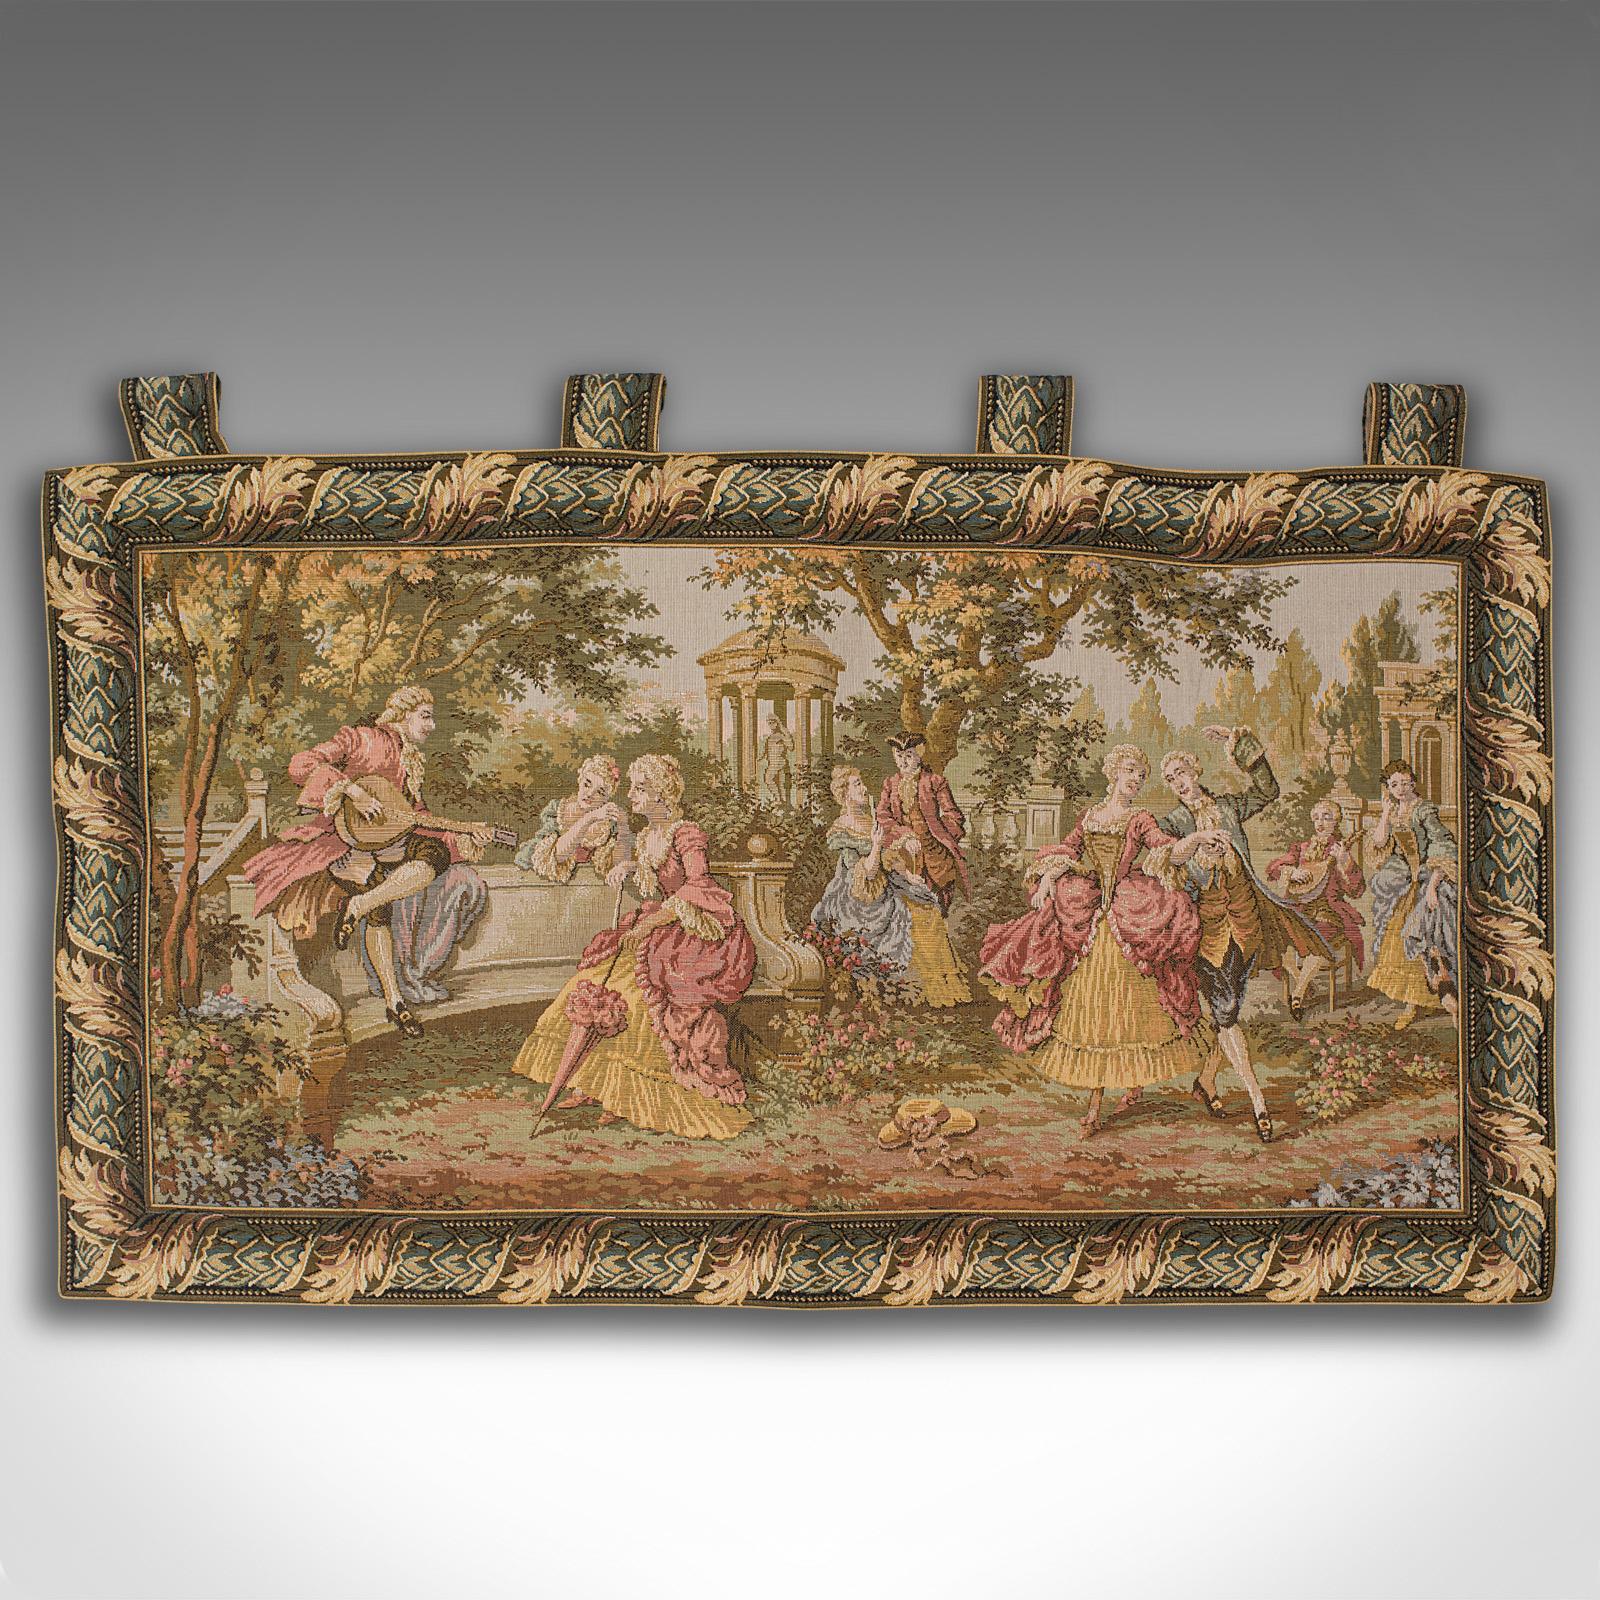 This is a vintage wall tapestry. A Continental, needlepoint classical scene, dating to the late 20th century, circa 1970.

Generously sized panel at 103 cm x 63.5 cm (40.5